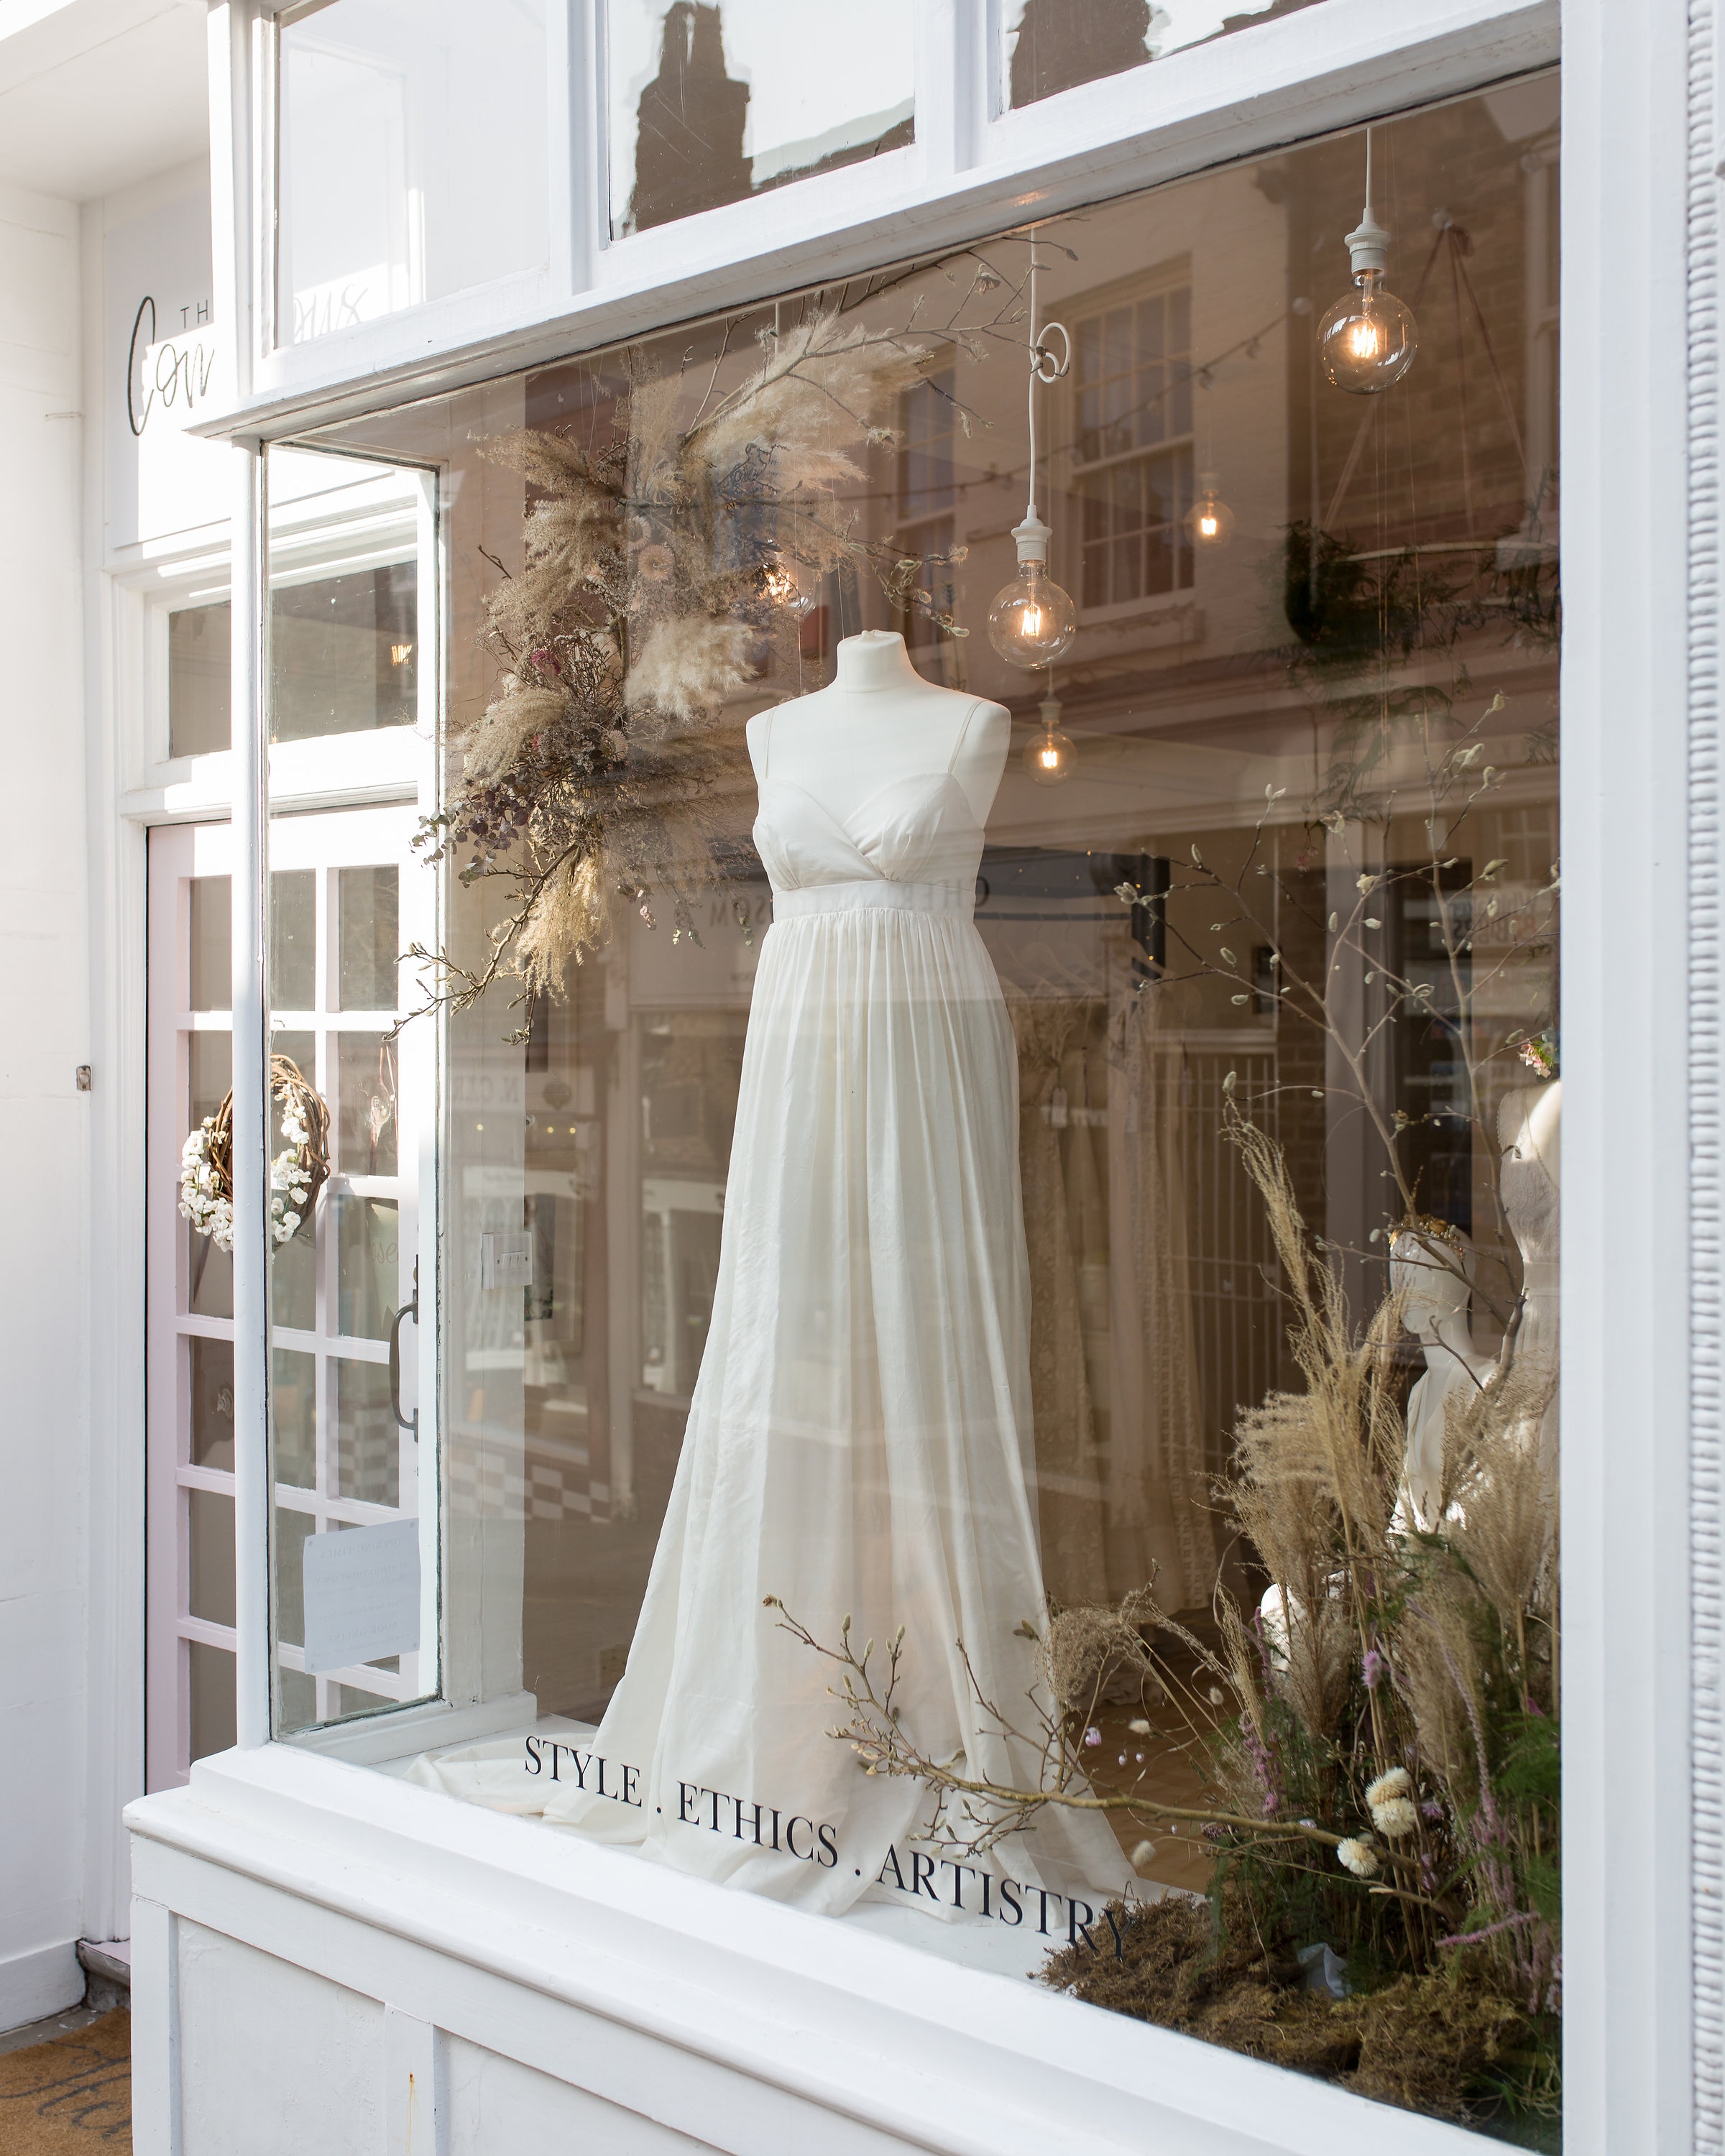 Shop window for The Conscious Bride- an ethical wedding shop. Photo courtesy of Charlotte Palazzo Photography.